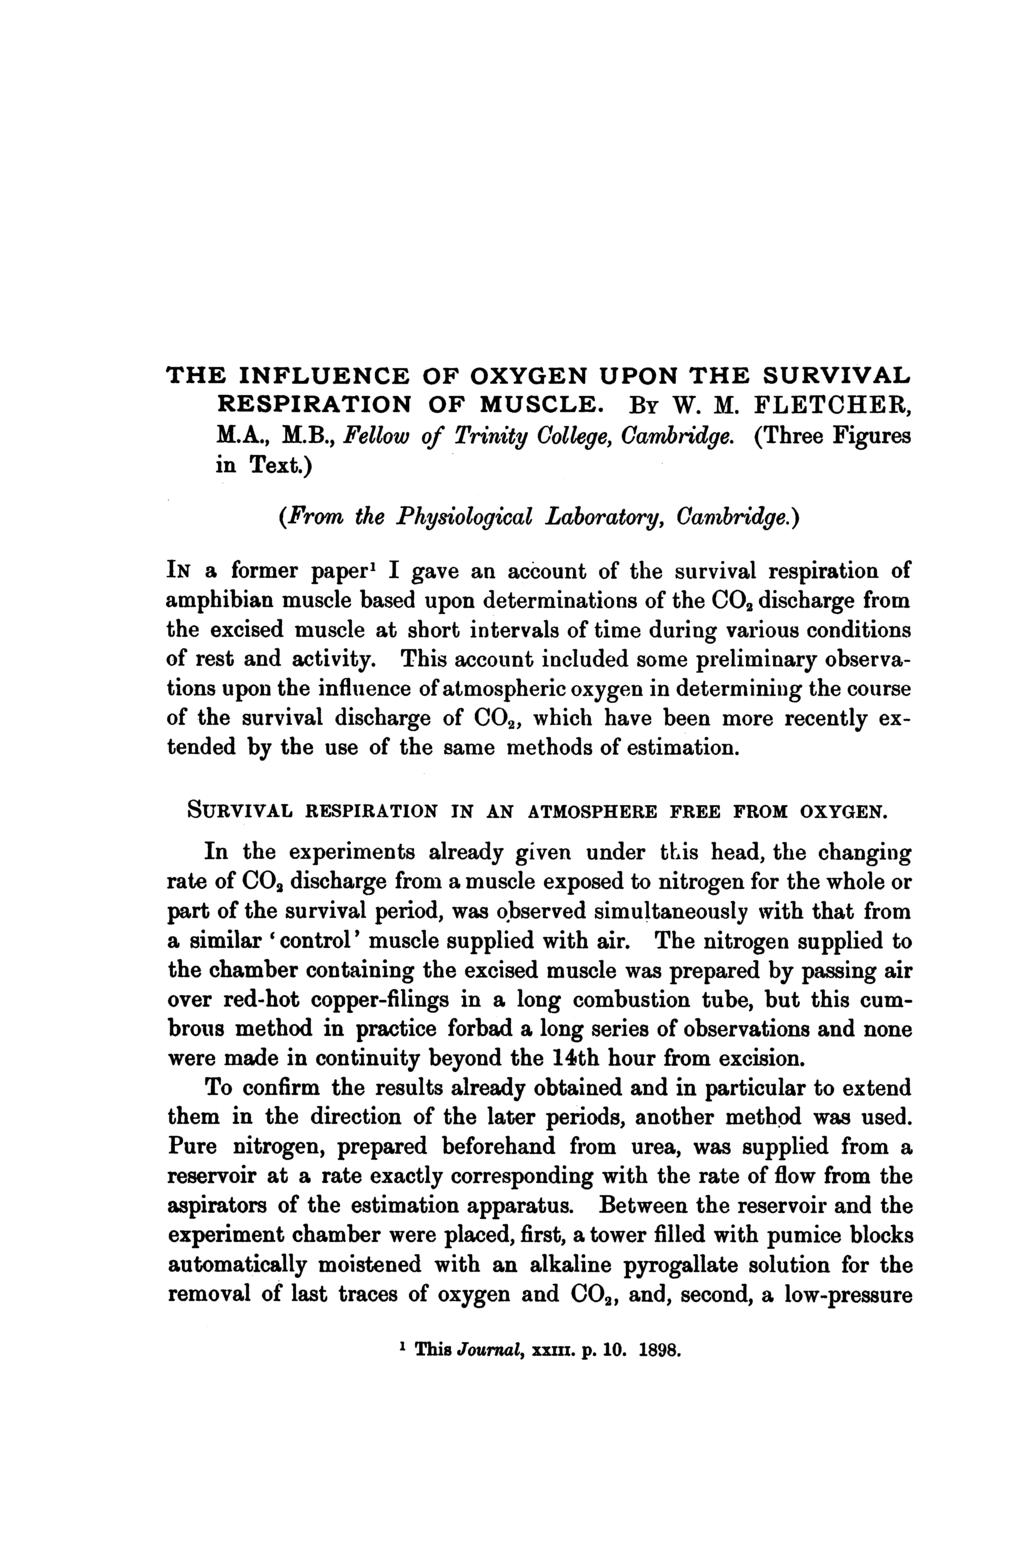 THE INFLUENCE OF OXYGEN UPON THE SURVIVAL RESPIRATION OF MUSCLE. By W. M. FLETCHER, M.A., M.B., Fellow of Trinity College, Cambrtidge. (Three Figures in Text.